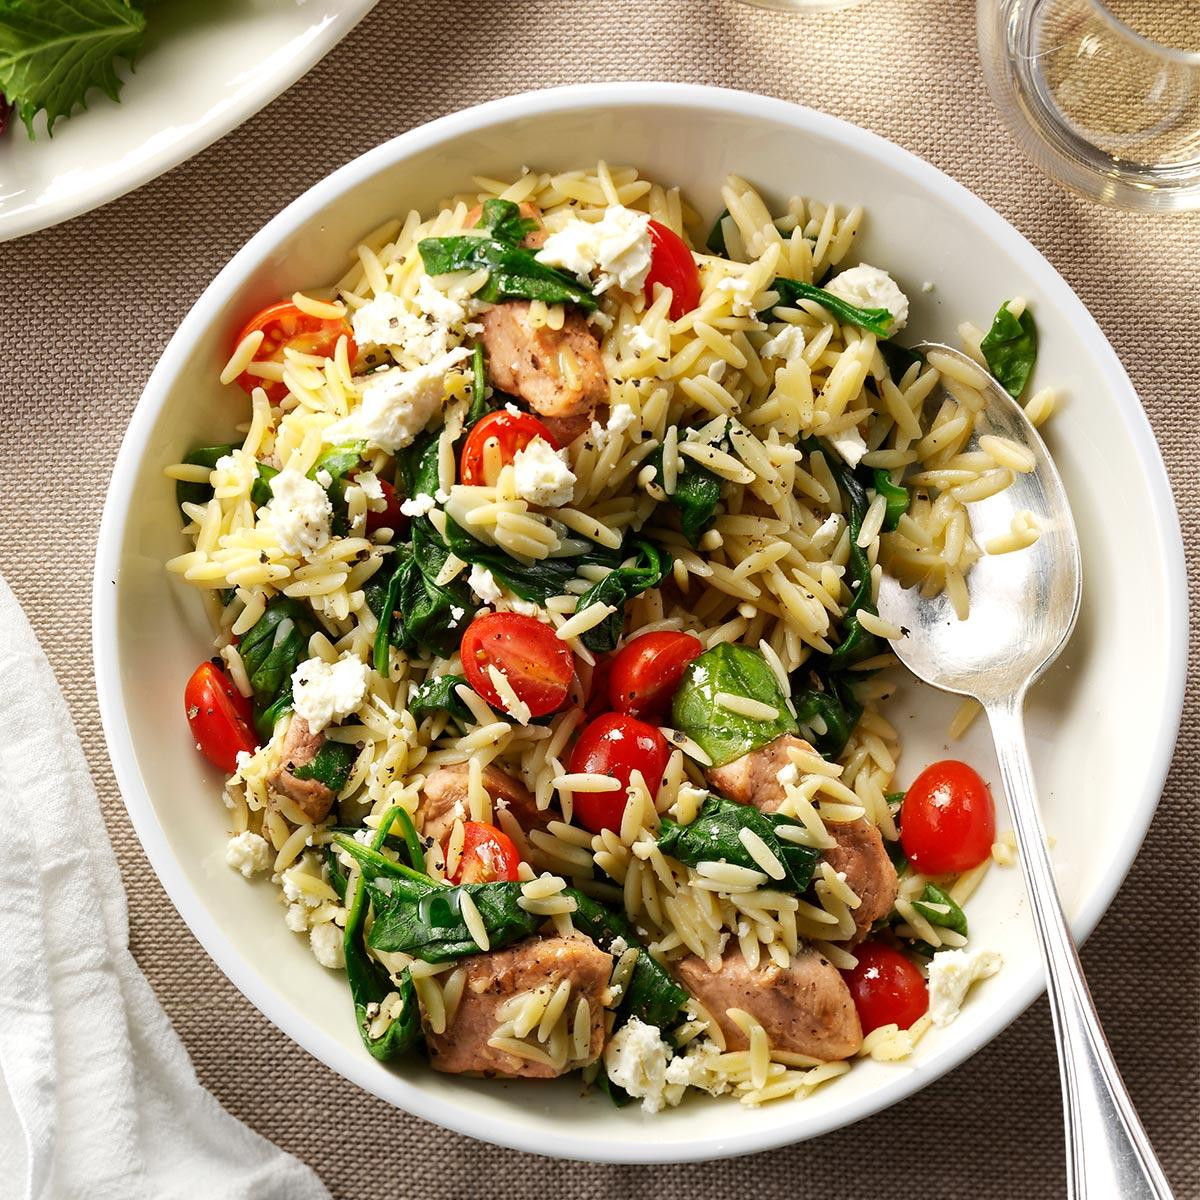 Healthy Food For Dinner
 Mediterranean Pork and Orzo Recipe